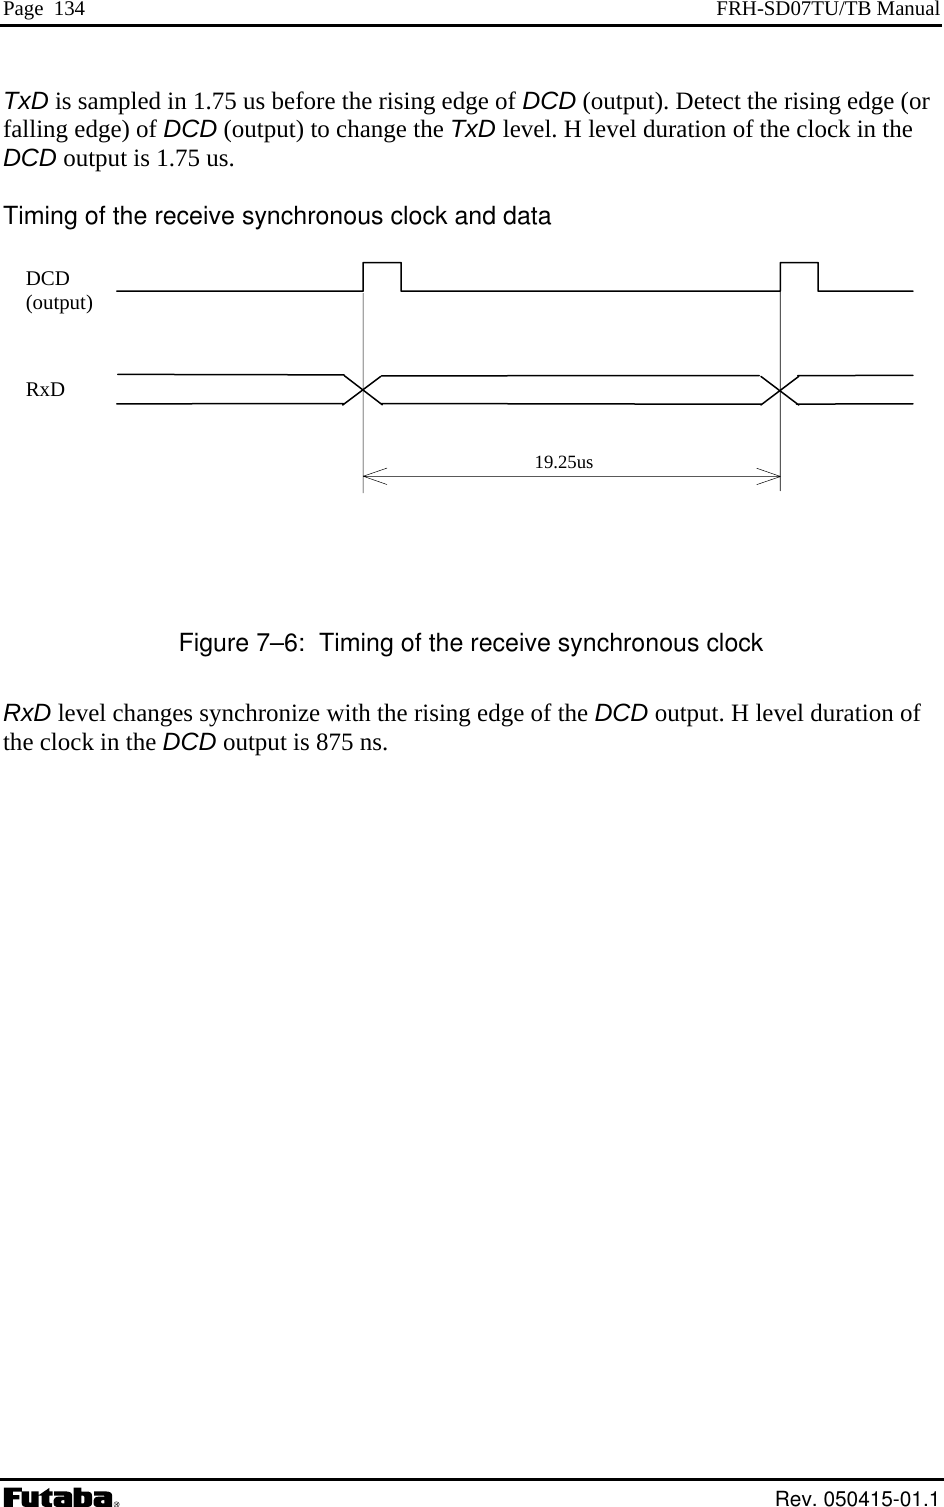 Page  134  FRH-SD07TU/TB Manual TxD is sampled in 1.7 or falling edge) of DCD l duration of the clock in the DCD output is 1.75 us.  Timing of the receiv      Figure 7–6:  Timing of the receive synchronous clock xD level changes synchronize with the rising edge of the DCD output. H level duration of DCD output is 875 ns. 19.25us5 us before the rising edge of DCD (output). Detect the rising edge ((output) to change the TxD level. H levee synchronous clock and data         Rthe clock in the DCD (output) RxD  Rev. 050415-01.1 